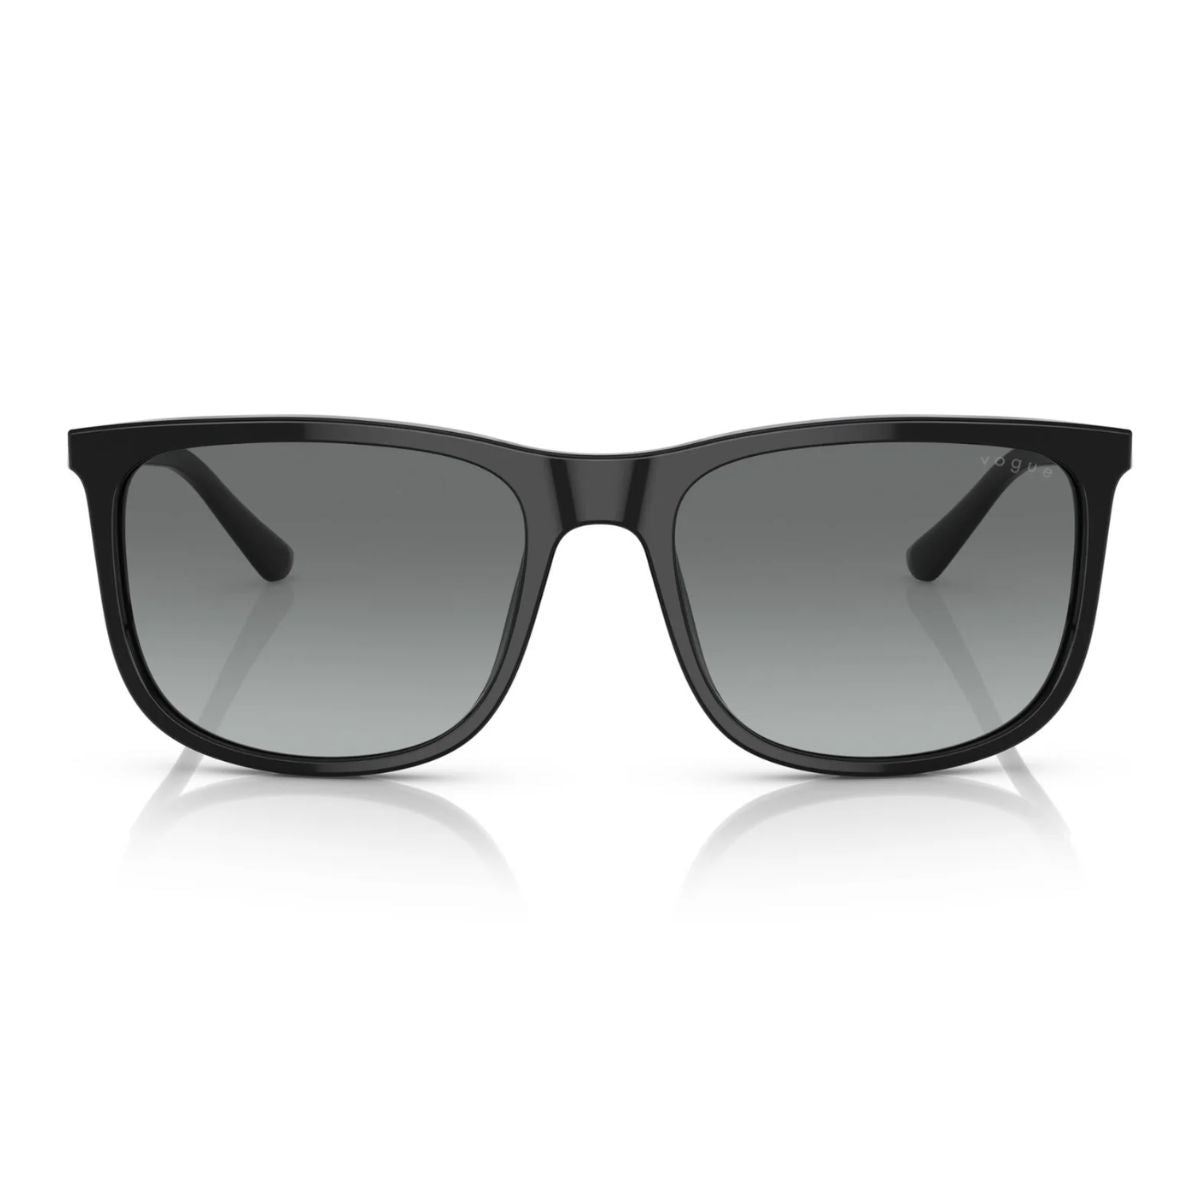 "Upgrade your look with Vogue VO 5567 238613 black sunglasses for women from Optorium Eyewear, featuring UV protection."